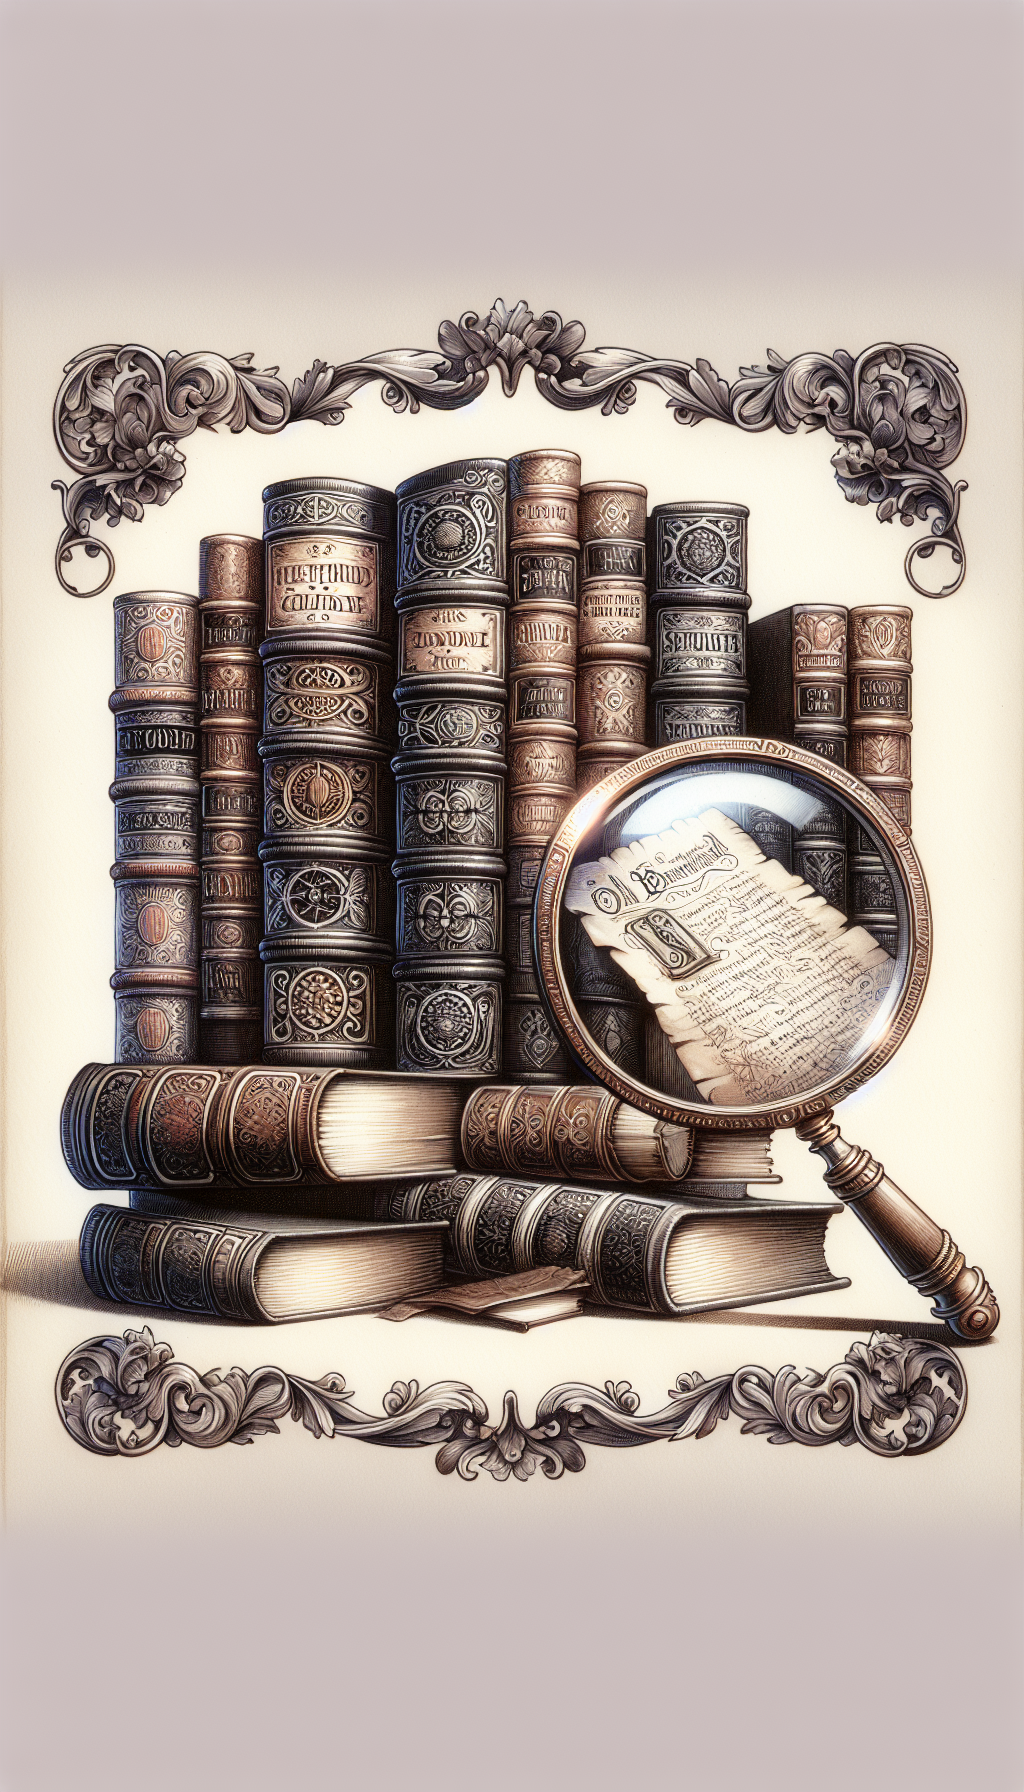 An antique, magnifying glass peeks over a pile of weathered, leather-bound books, each spine embossed with golden titles and fading flourishes. A ghostly, transparent scroll unfurls beside them, bearing the inscription "Old Book Value Guide," with intricate filigree corners. The style merges pen-and-ink shading for the tomes with ethereal watercolors for the scroll, suggesting both history and insight.